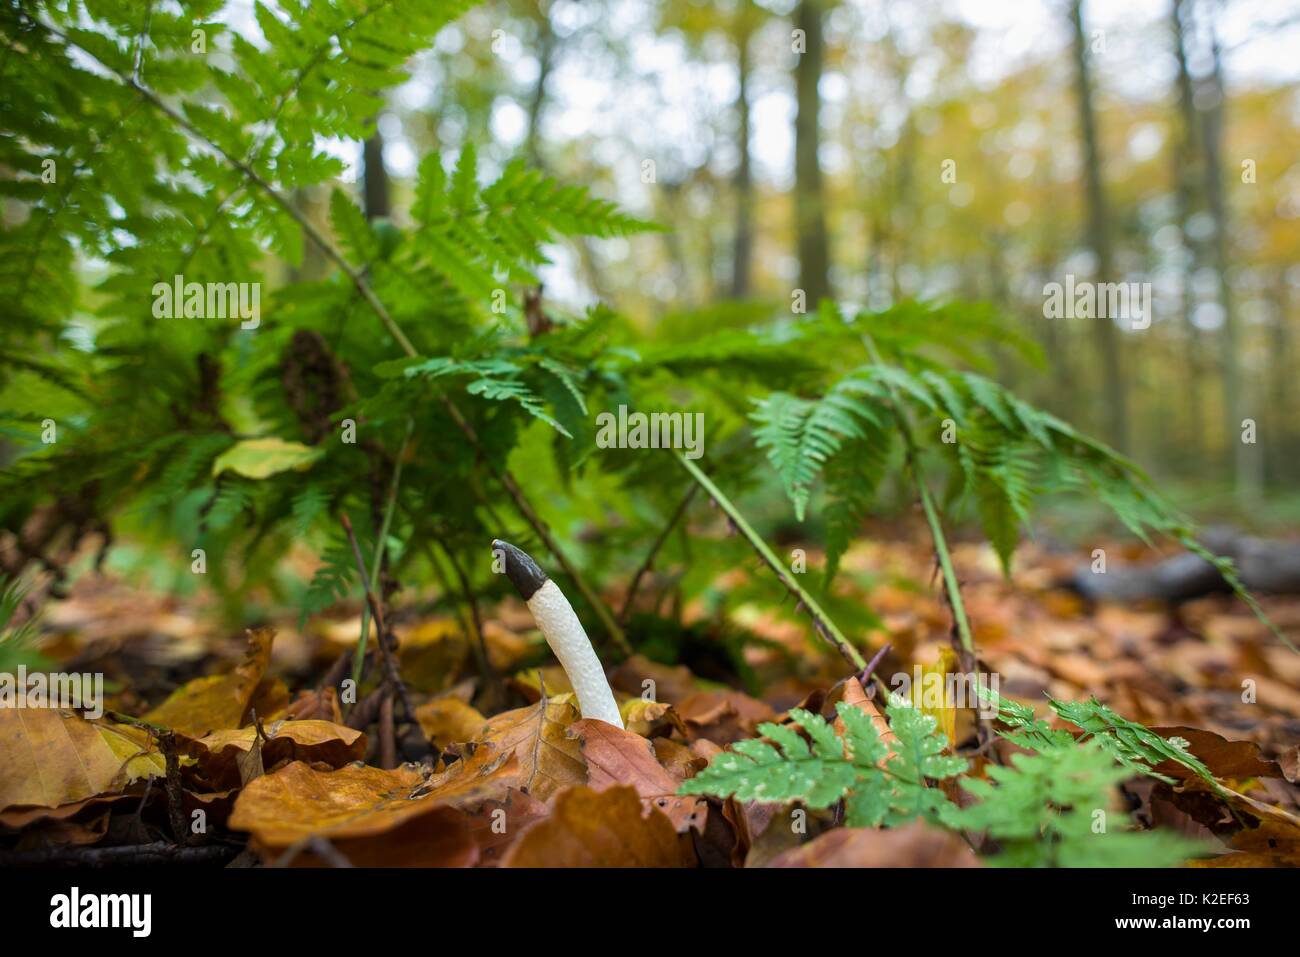 Dog Stinkhorn (Mutinus caninus) growing in leaf litter in beech woodland, England, UK October Stock Photo